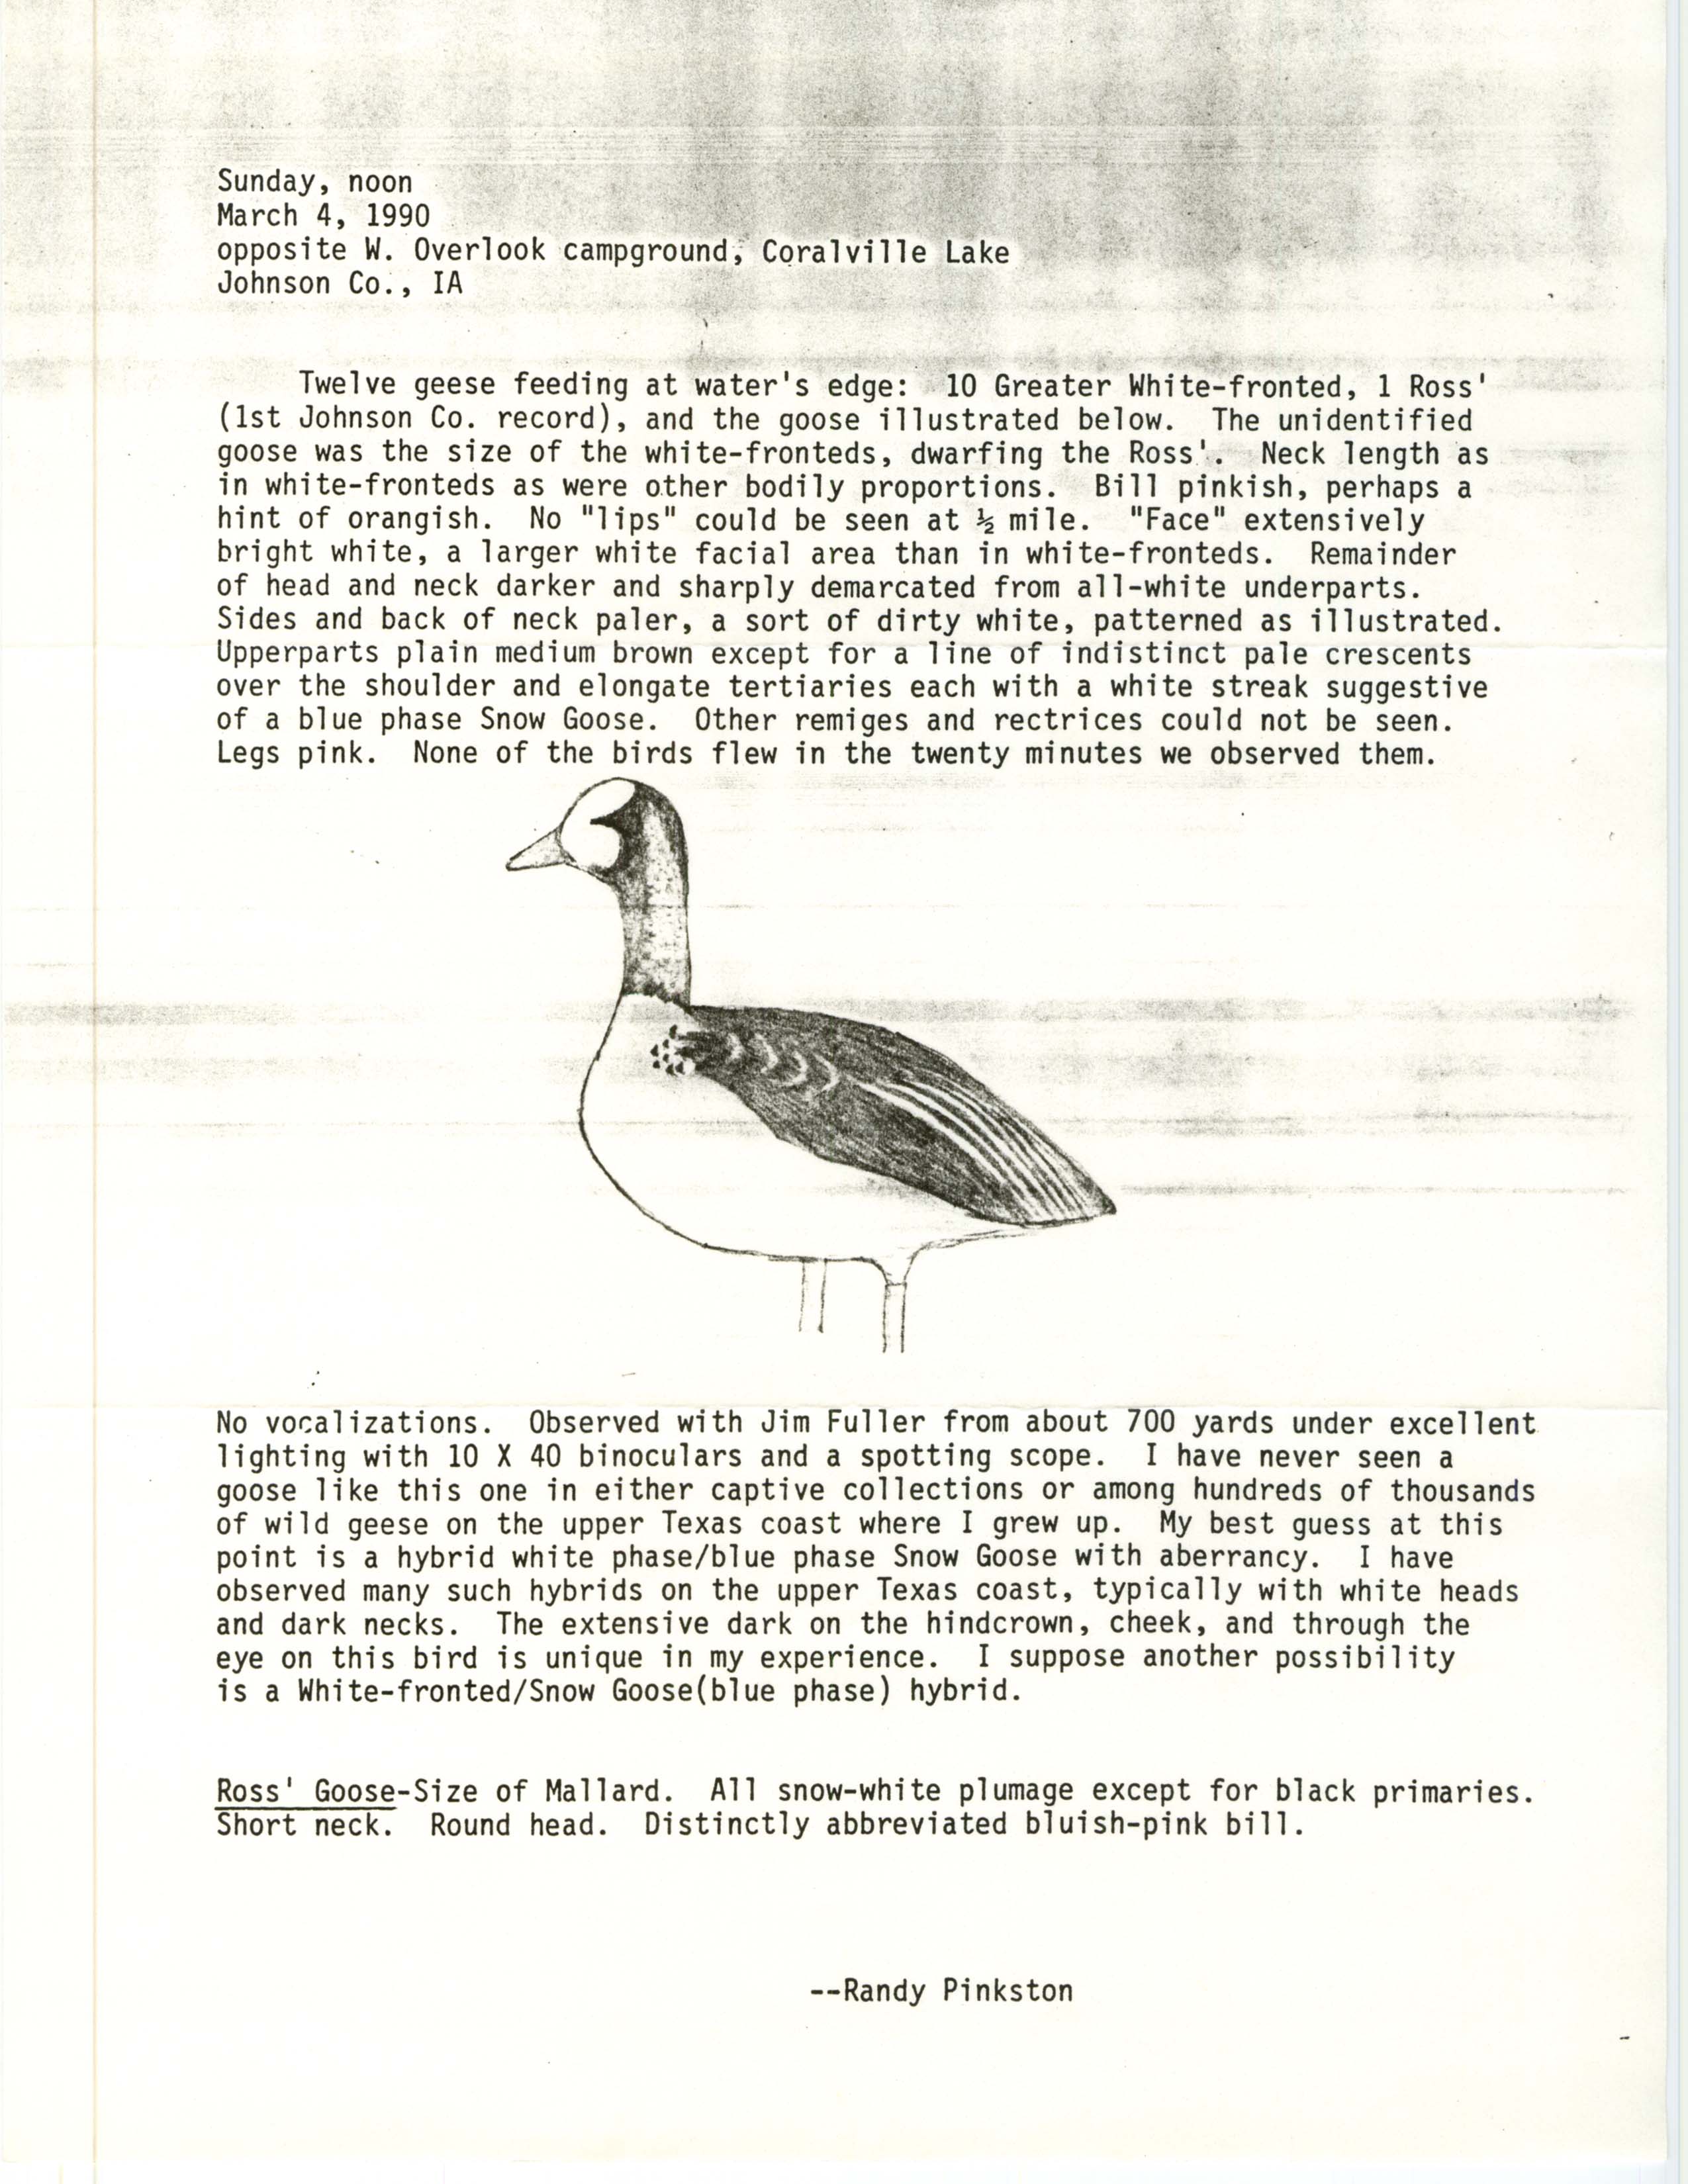 Rare bird documentation form for Goose species at West Overlook at Coralville Lake, 1990